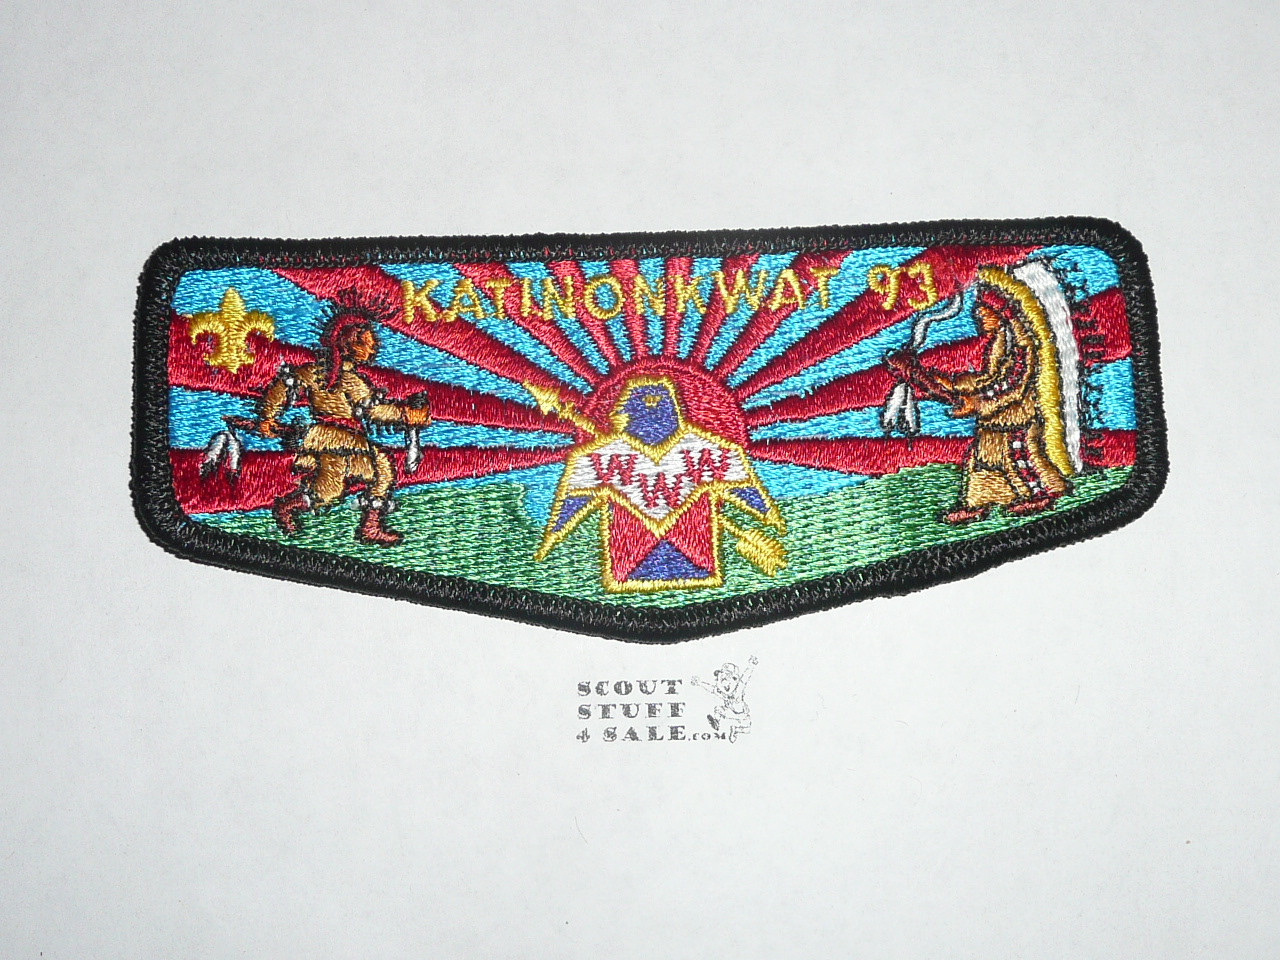 Order of the Arrow Lodge #93 Katinonkwat s10 Flap Patch - Boy Scout